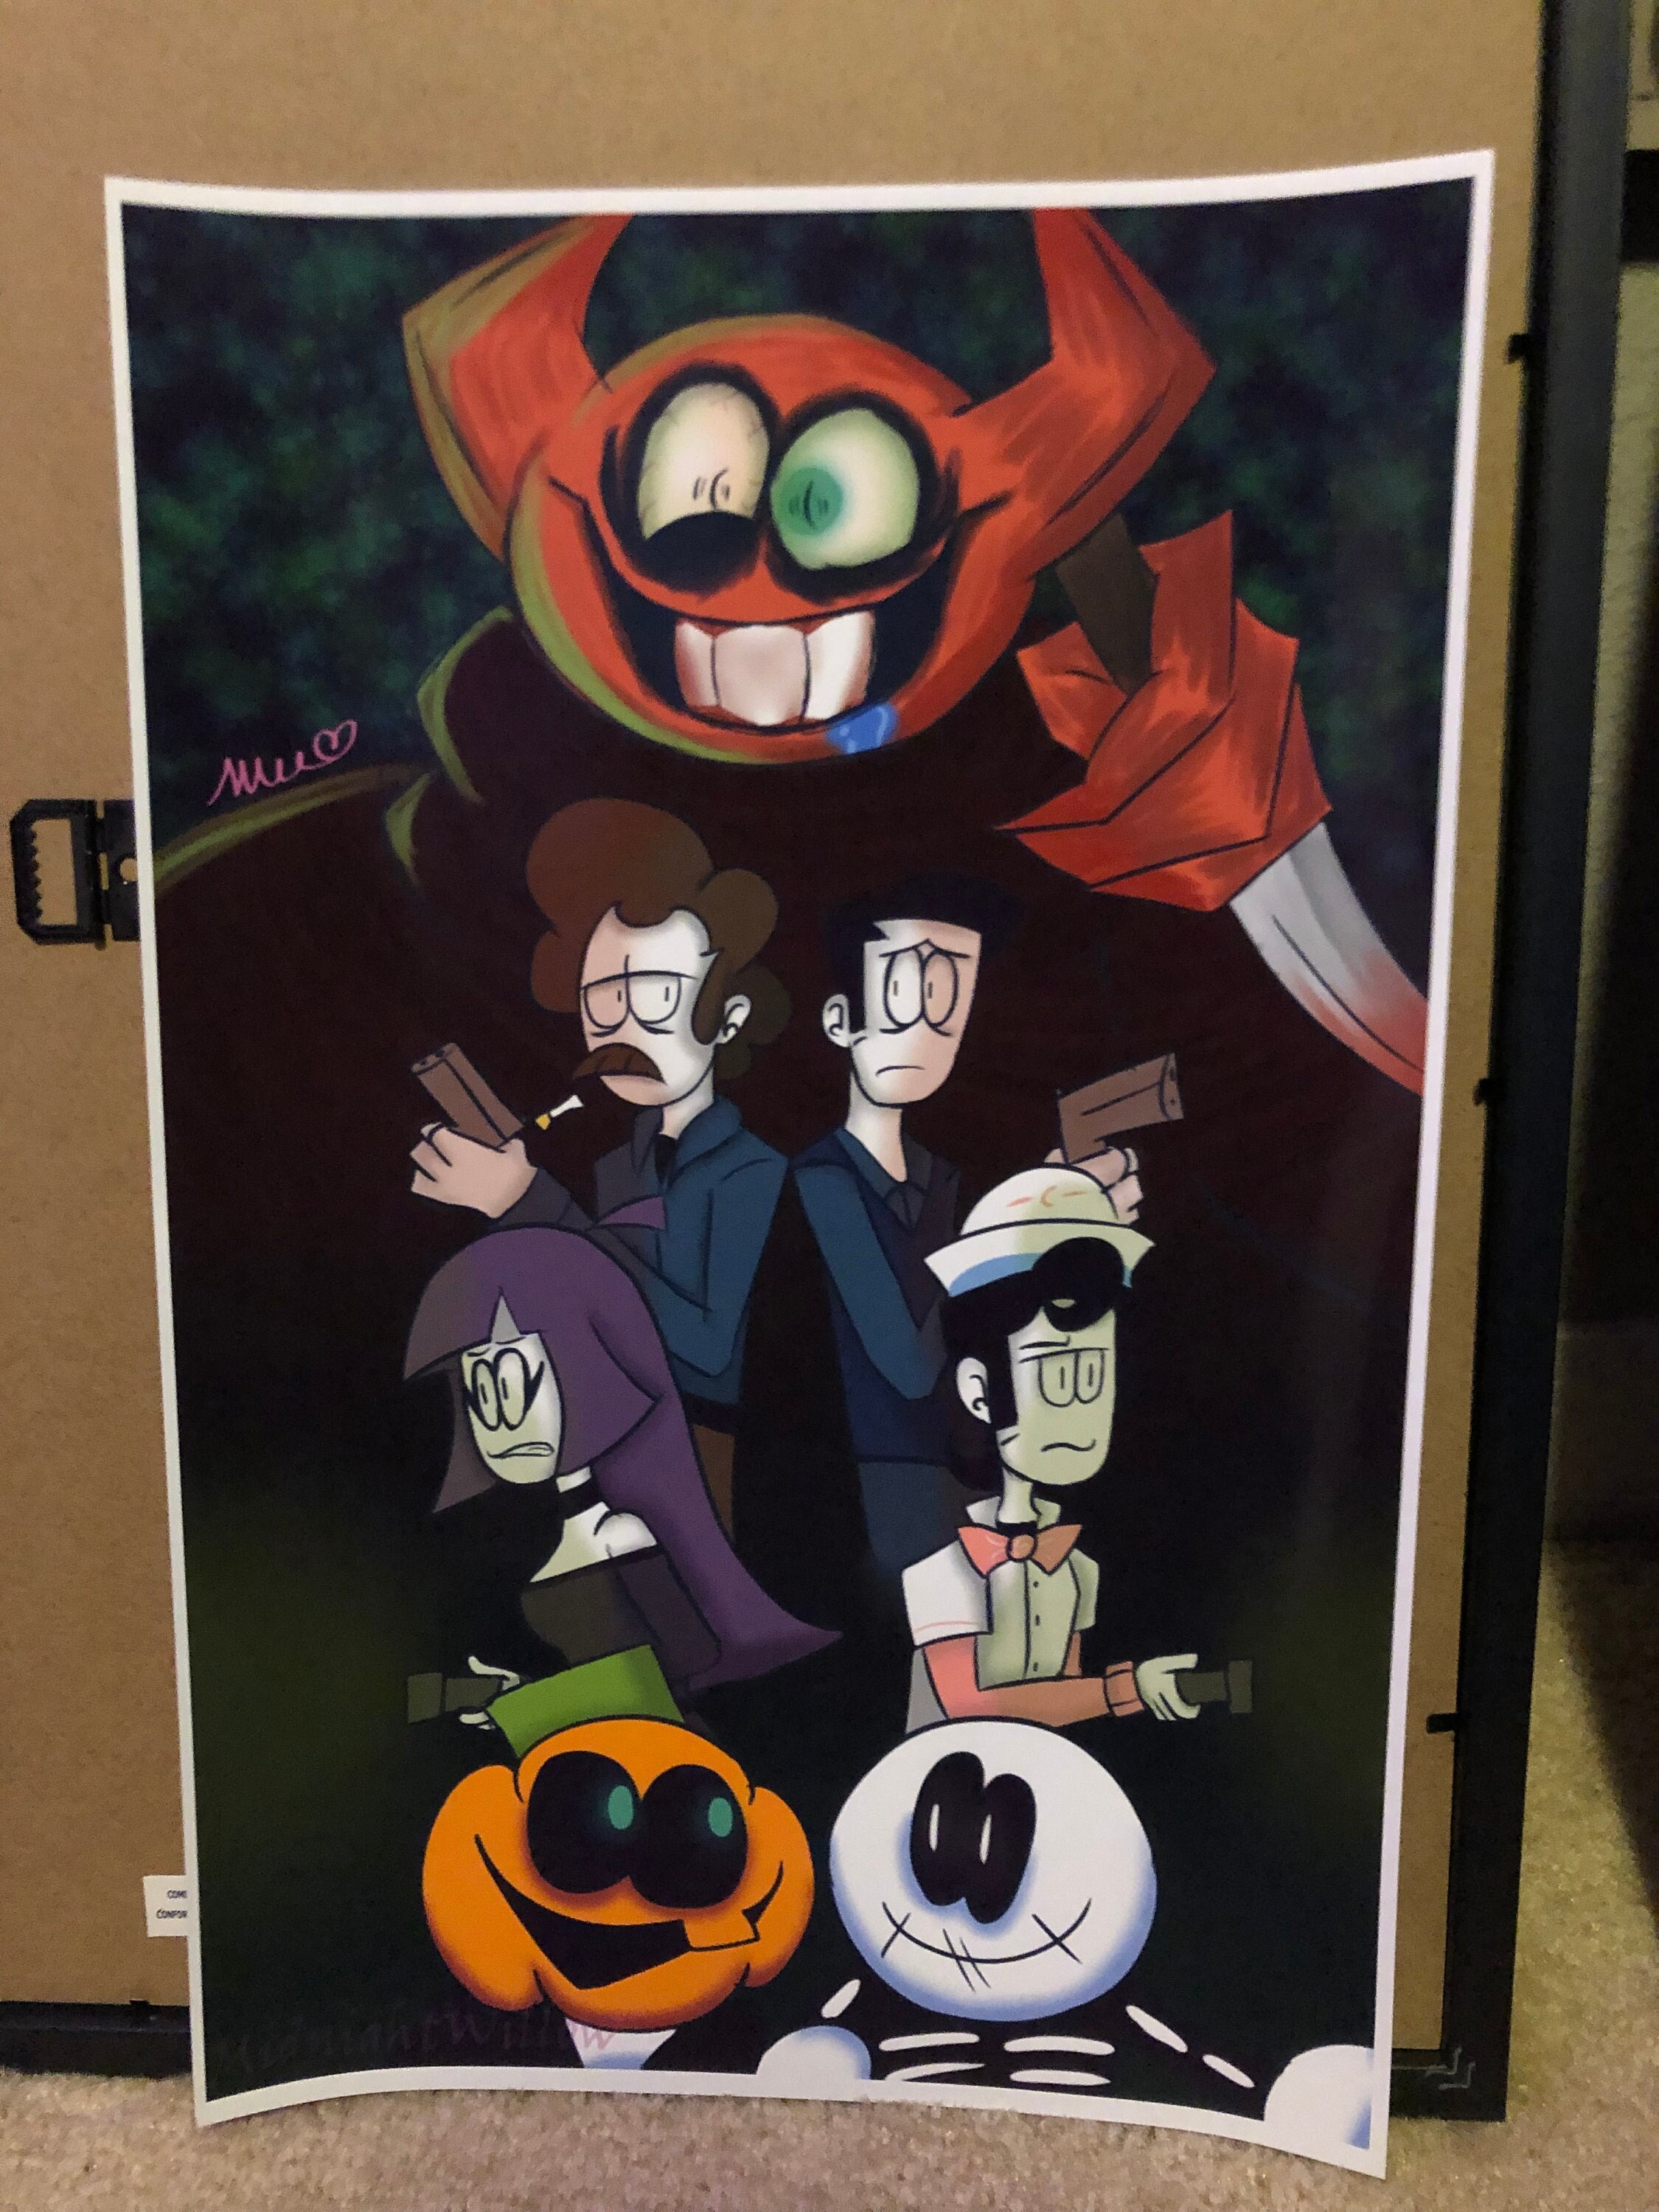 Spooky Month Poster for Sale by TinyPinkShoe